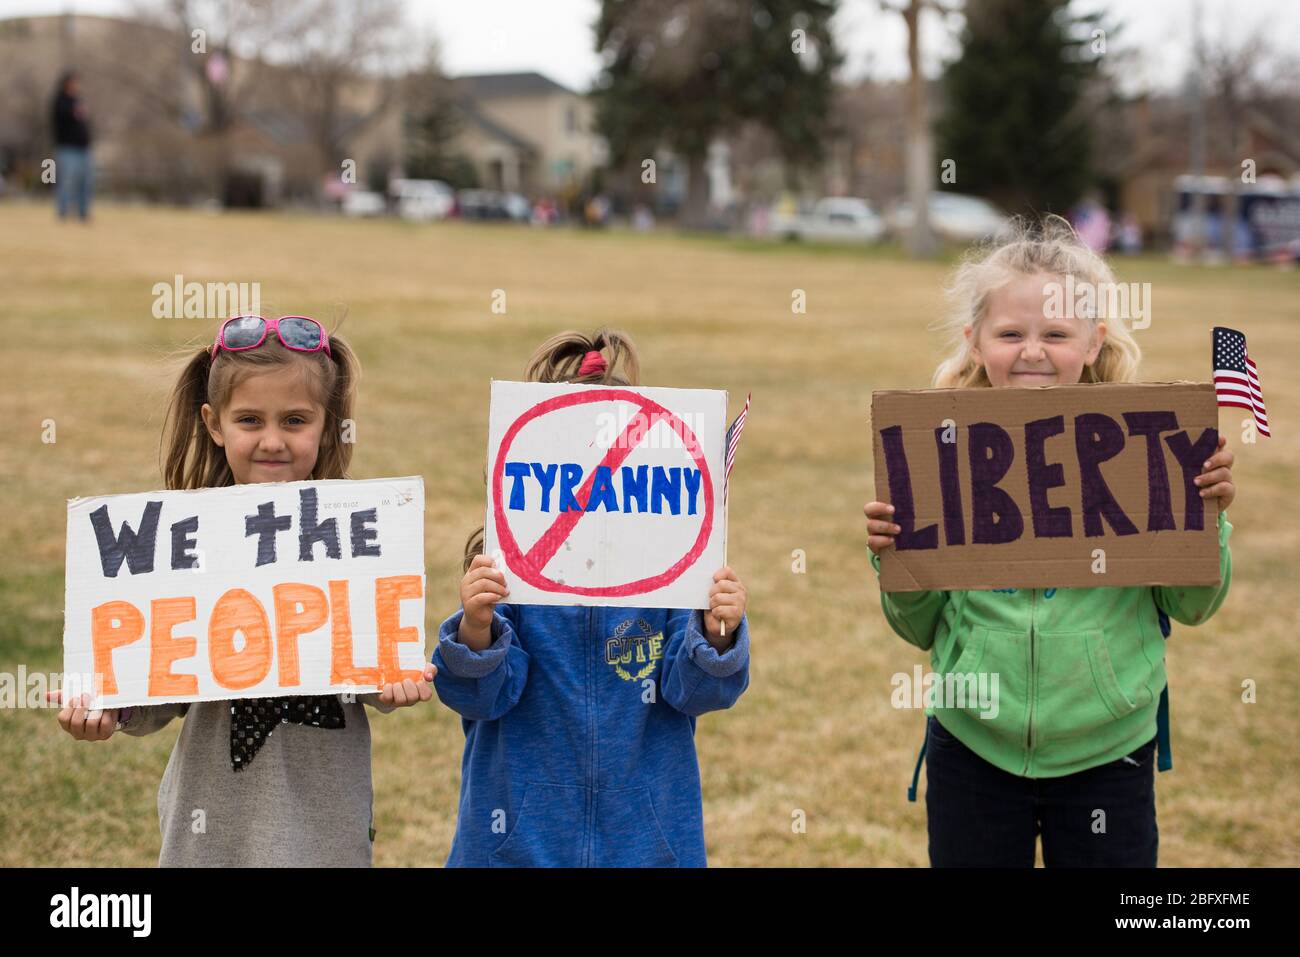 Helena, Montana - April 19, 2020: Children, young girls, holding liberty and tyranny sign at the protest rally at the Capitol due to the government sh Stock Photo